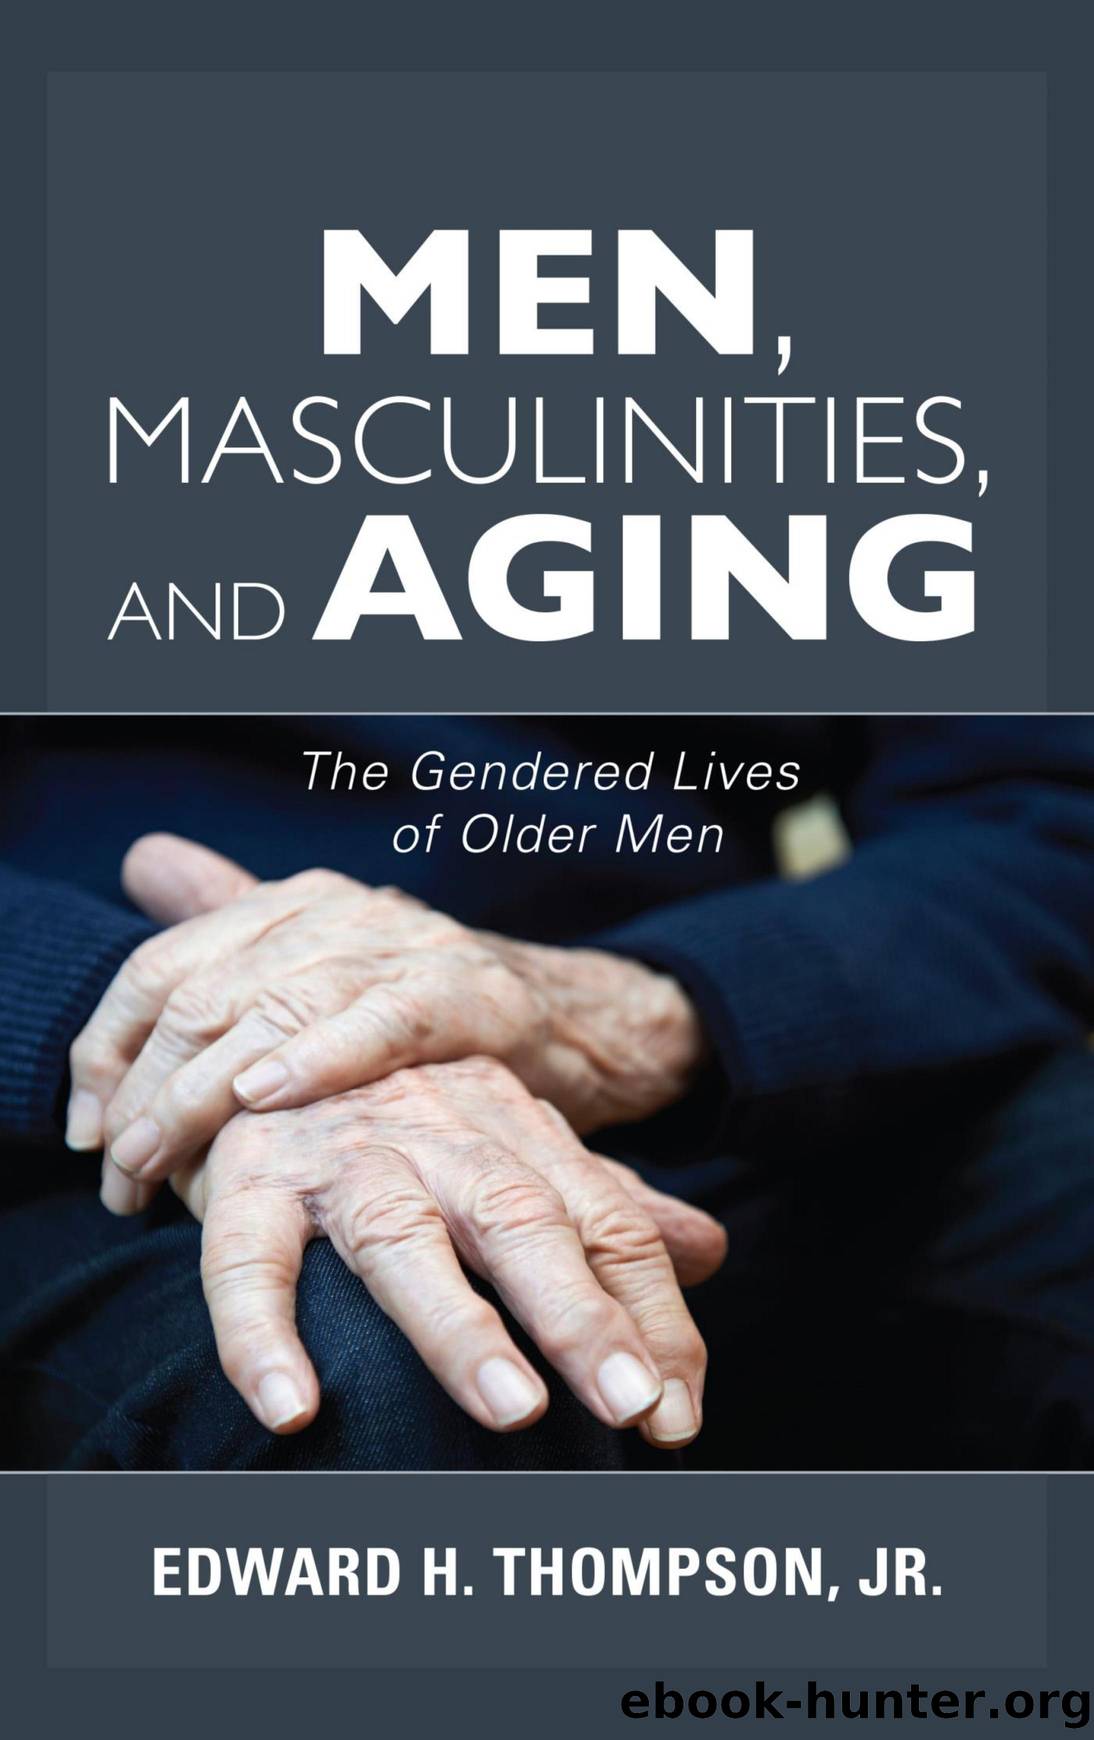 Men, Masculinities, and Aging: The Gendered Lives of Older Men by Edward H. Thompson Jr